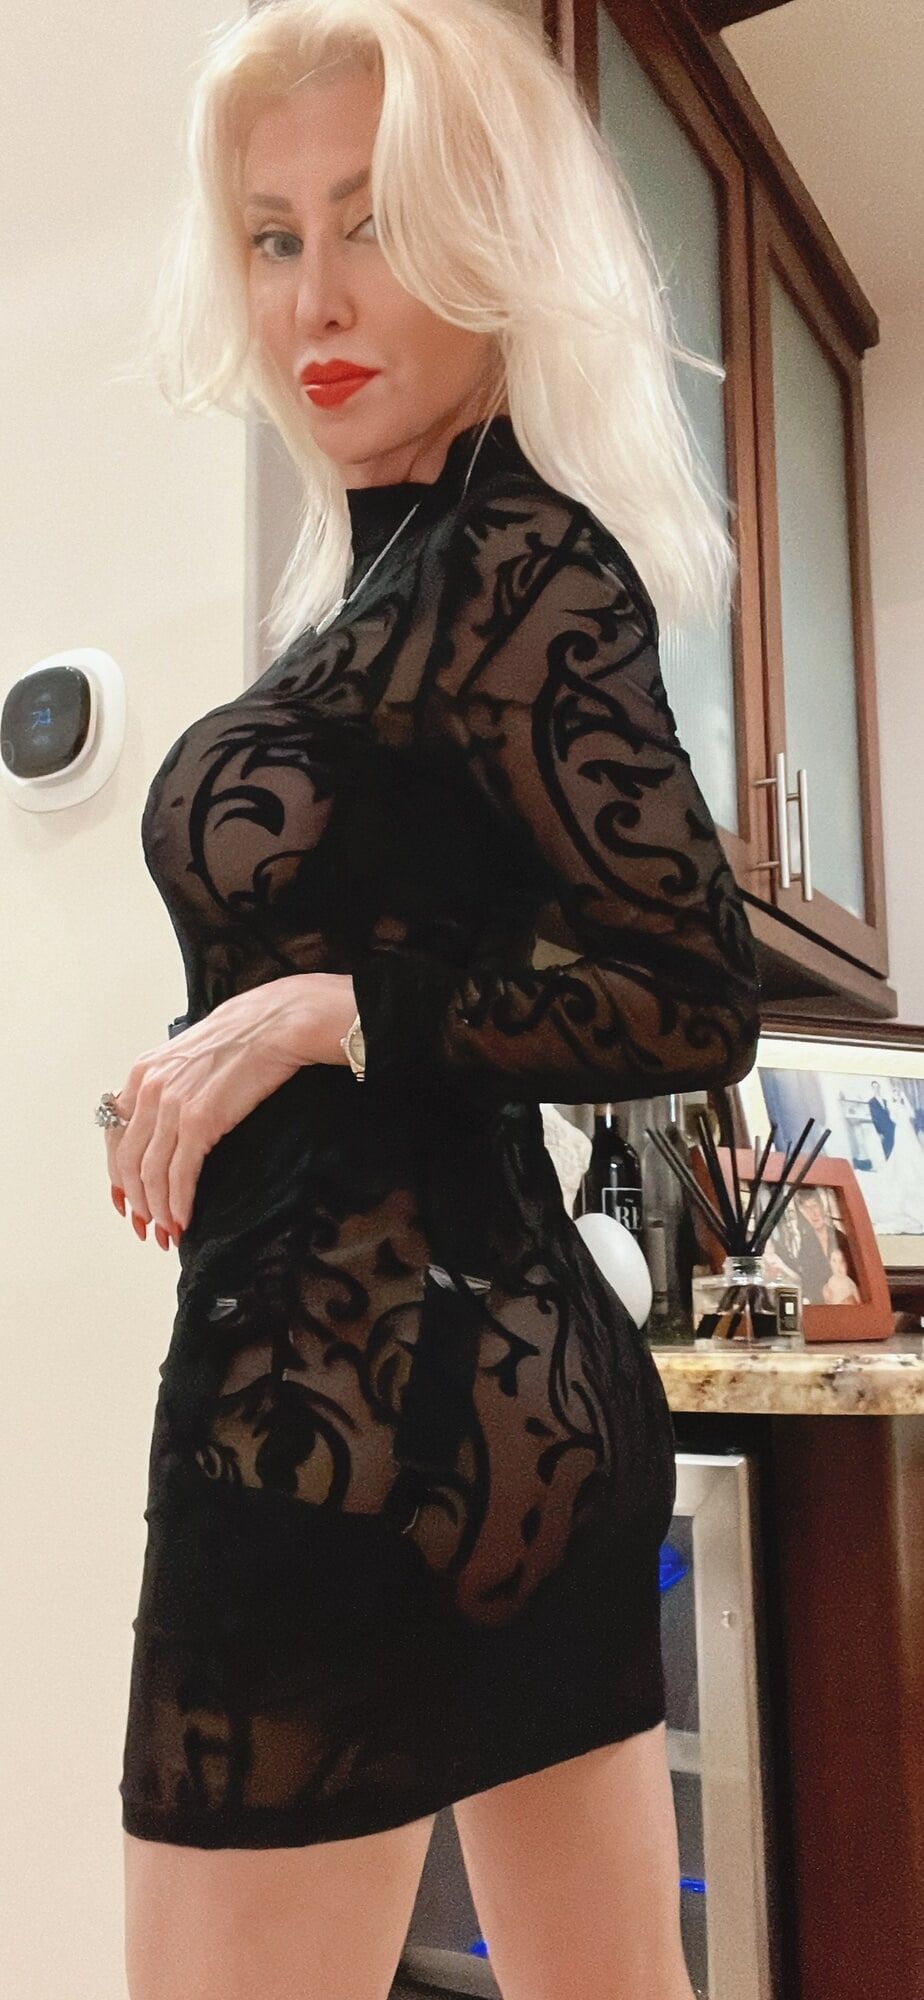 Going out in a sheer dress again  #8